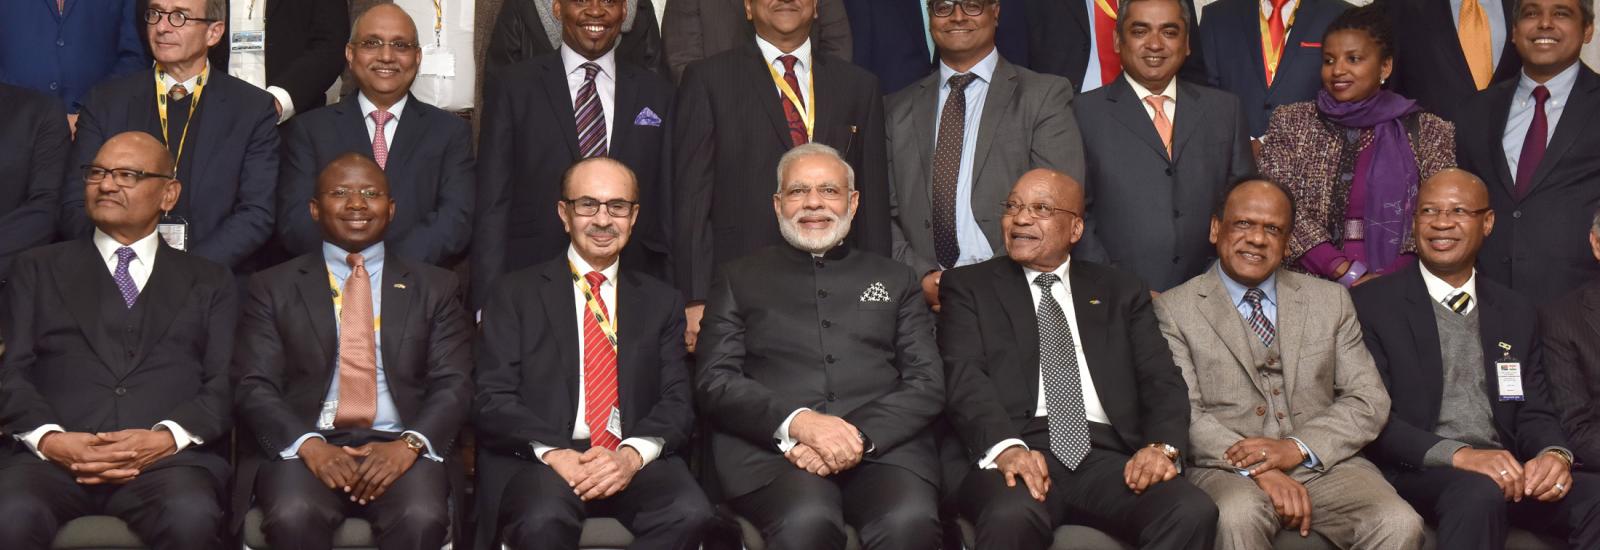 By Narendra Modi (At India-South Africa Business Summit) [CC BY-SA 2.0 (https://creativecommons.org/licenses/by-sa/2.0)], via Wikimedia Commons